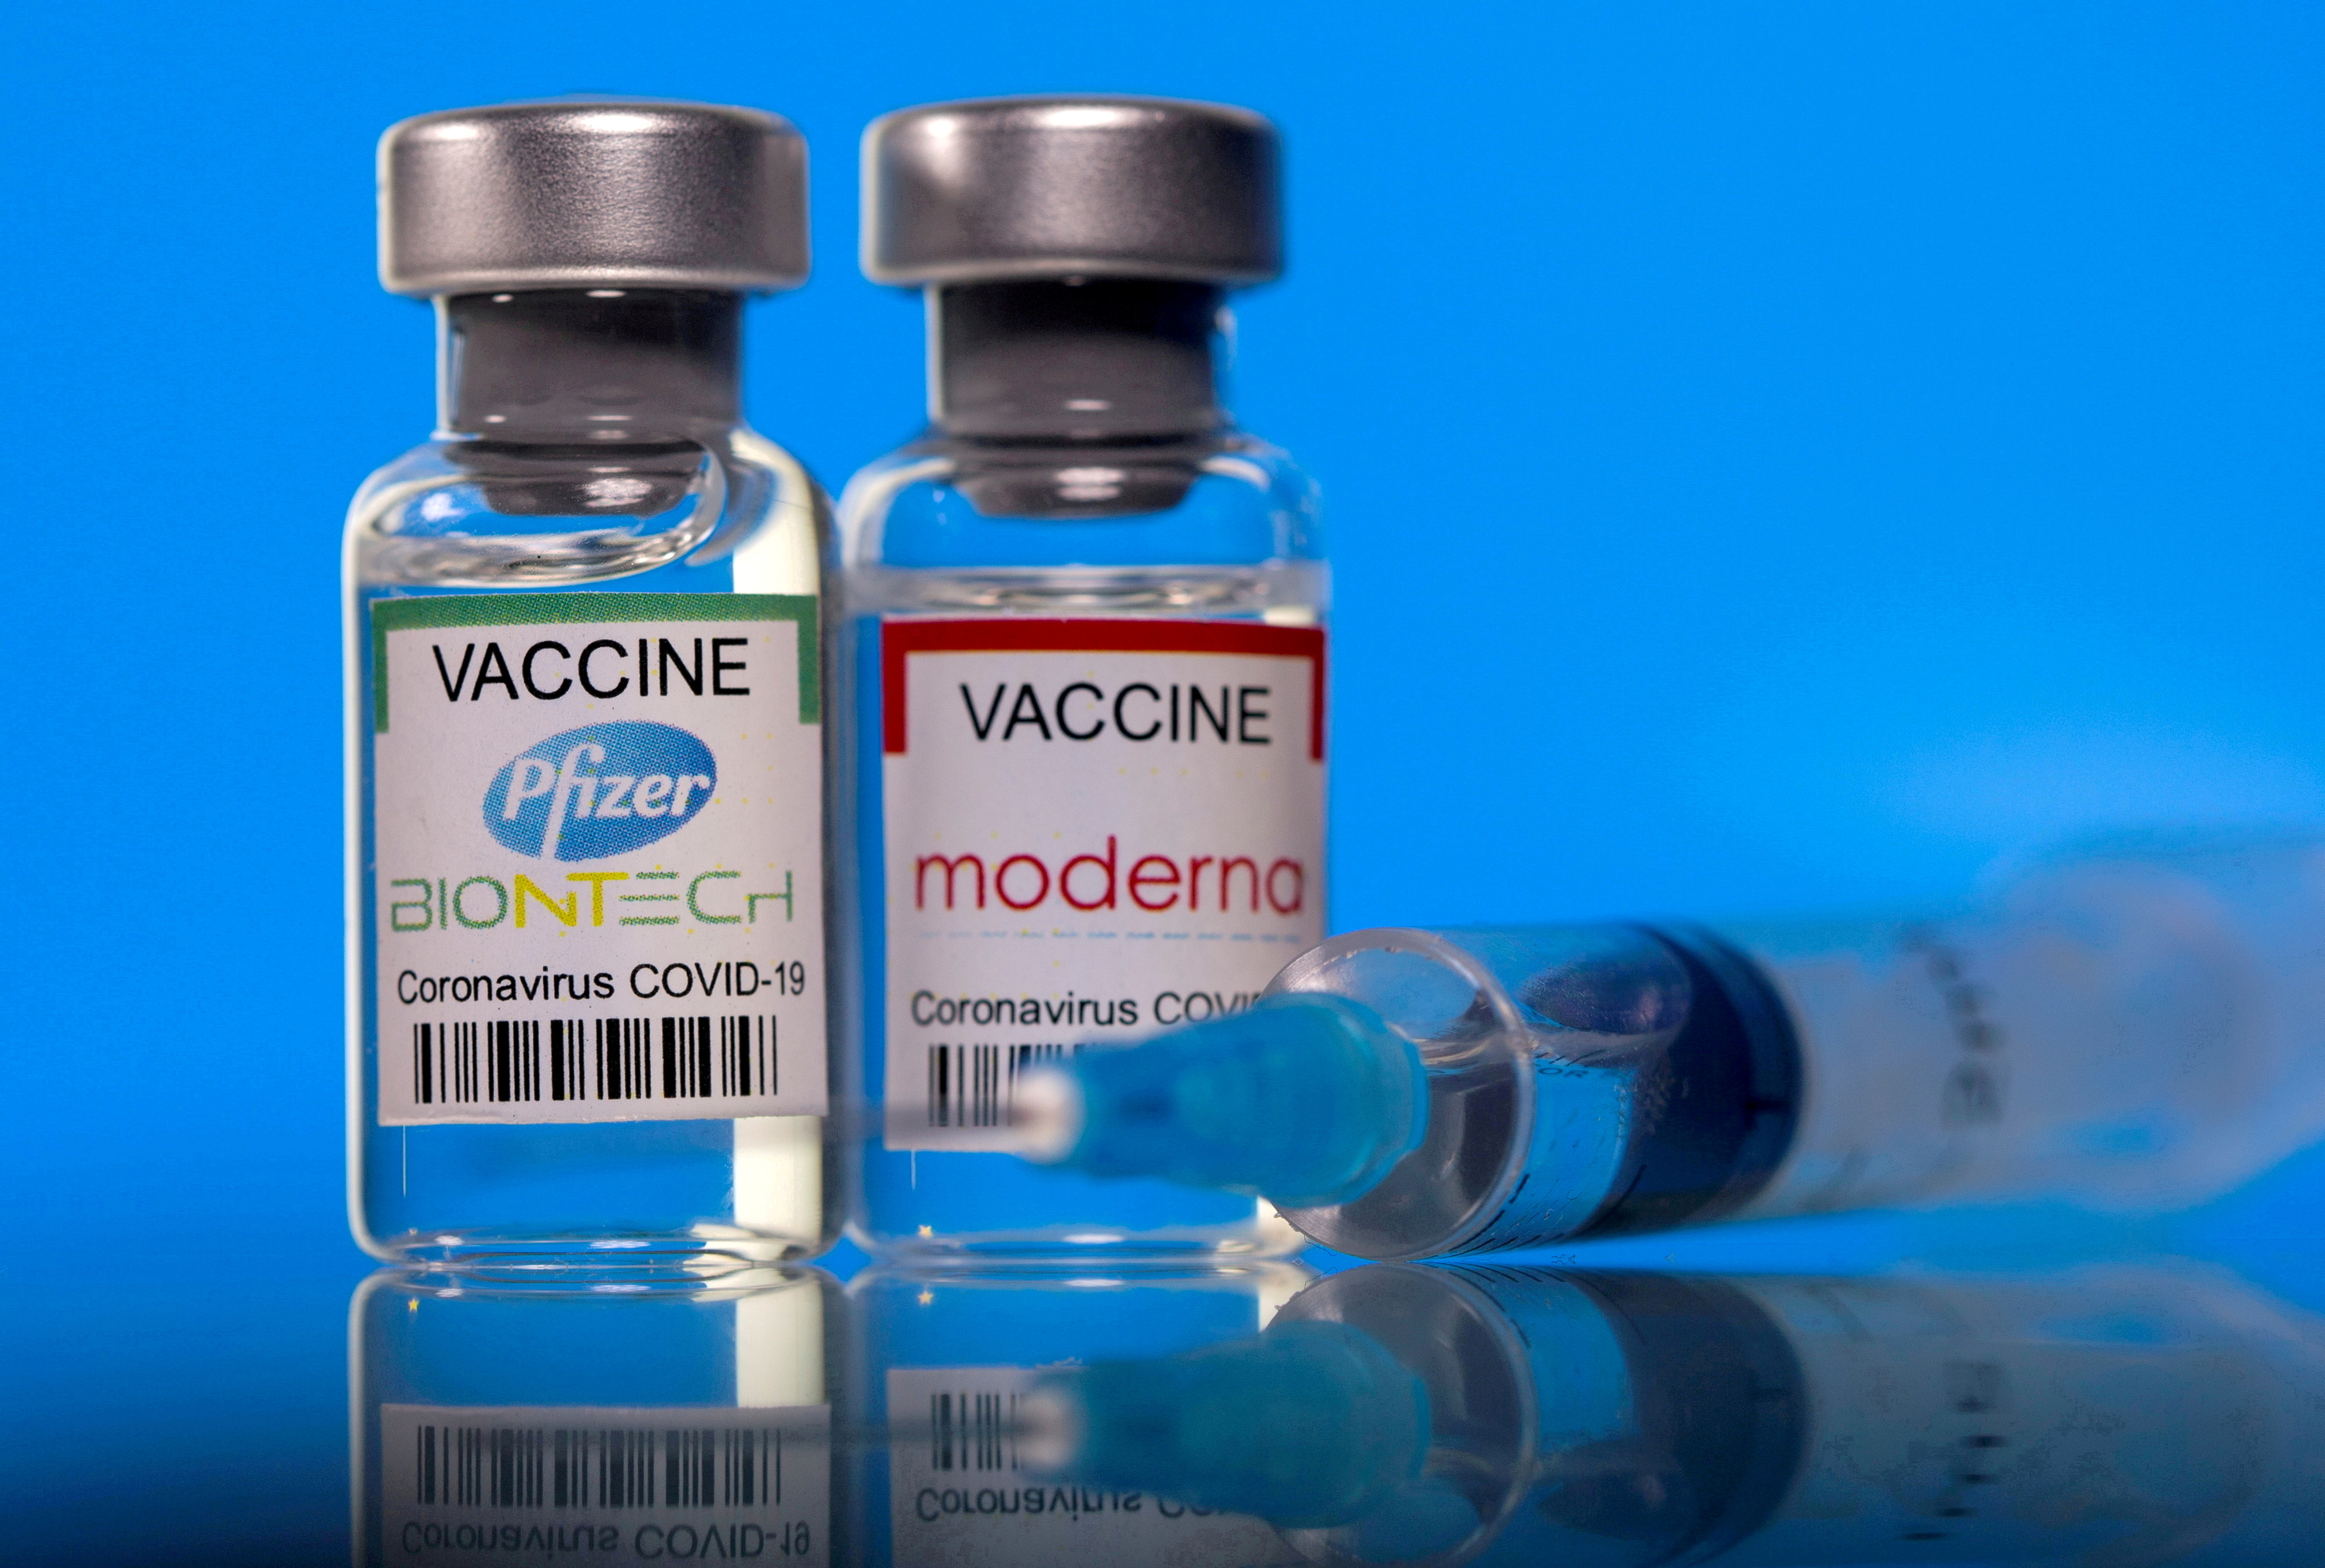 india govt won't buy pfizer, moderna vaccines amid local output -sources | reuters